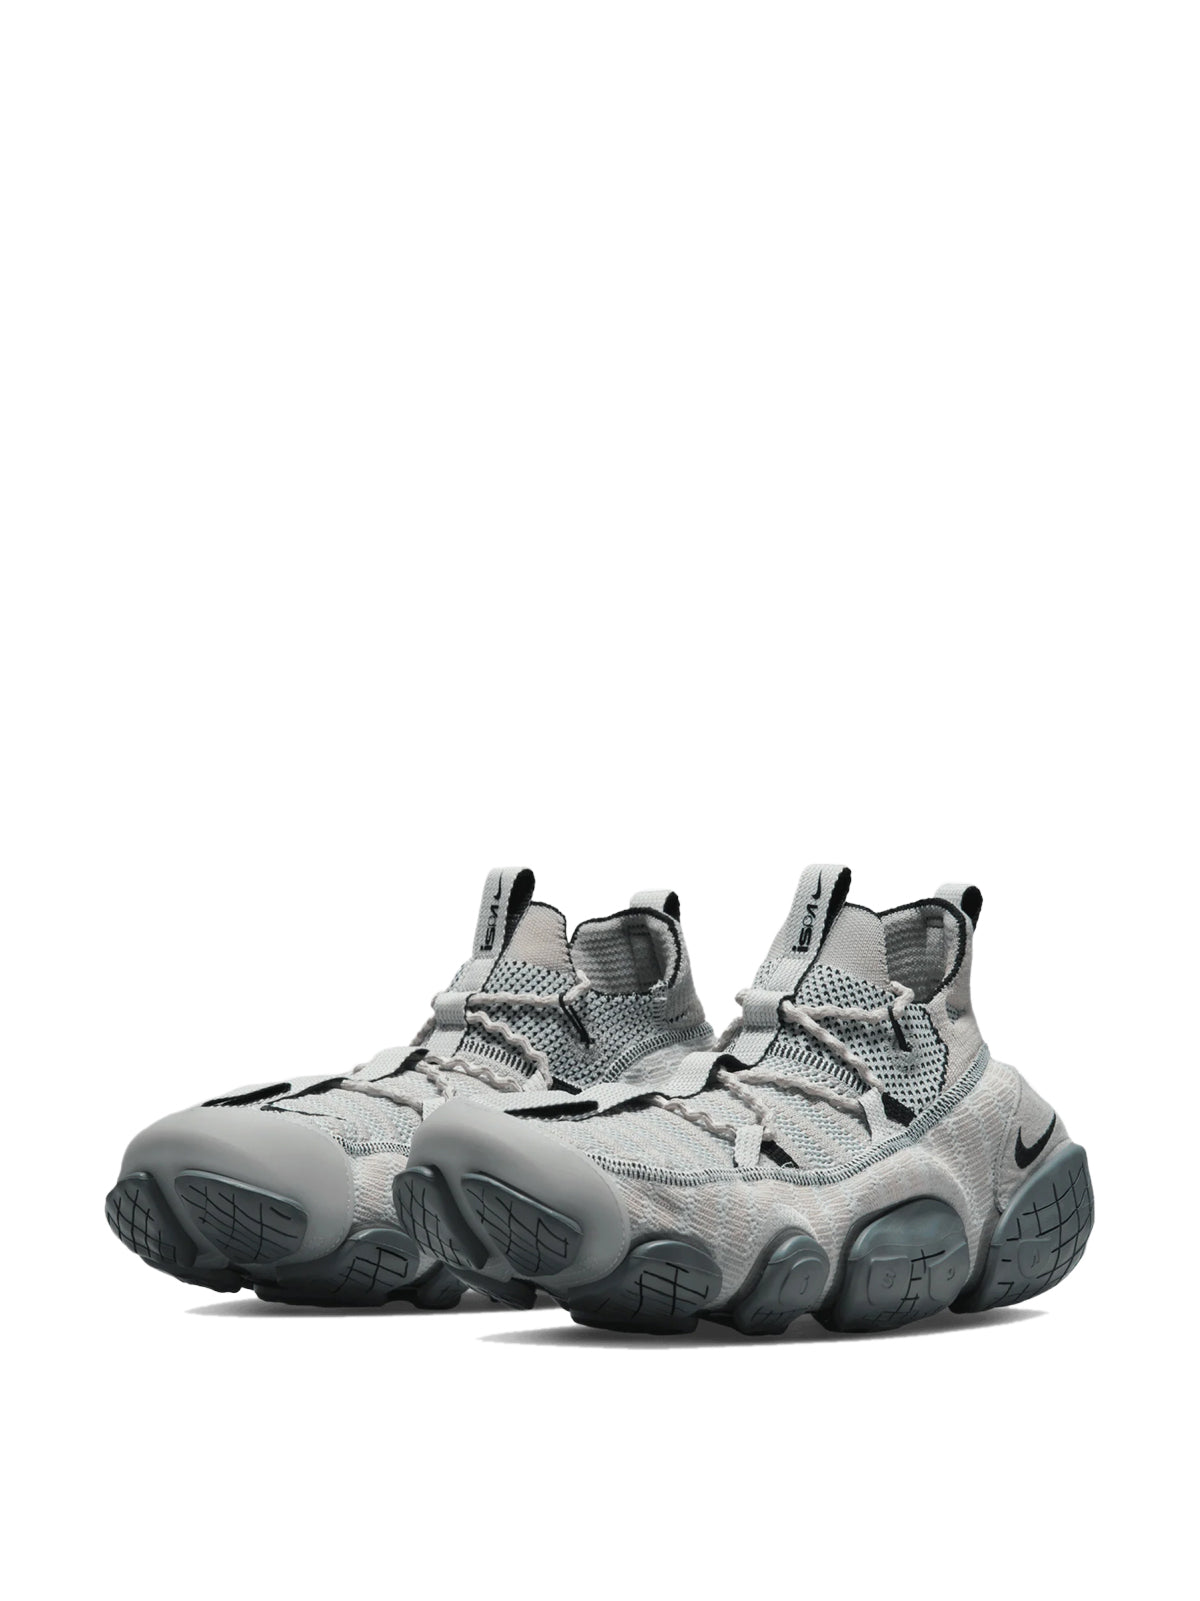 Nike-OUTLET-SALE-ISPA Link "Light Iron Ore" Sneakers-ARCHIVIST